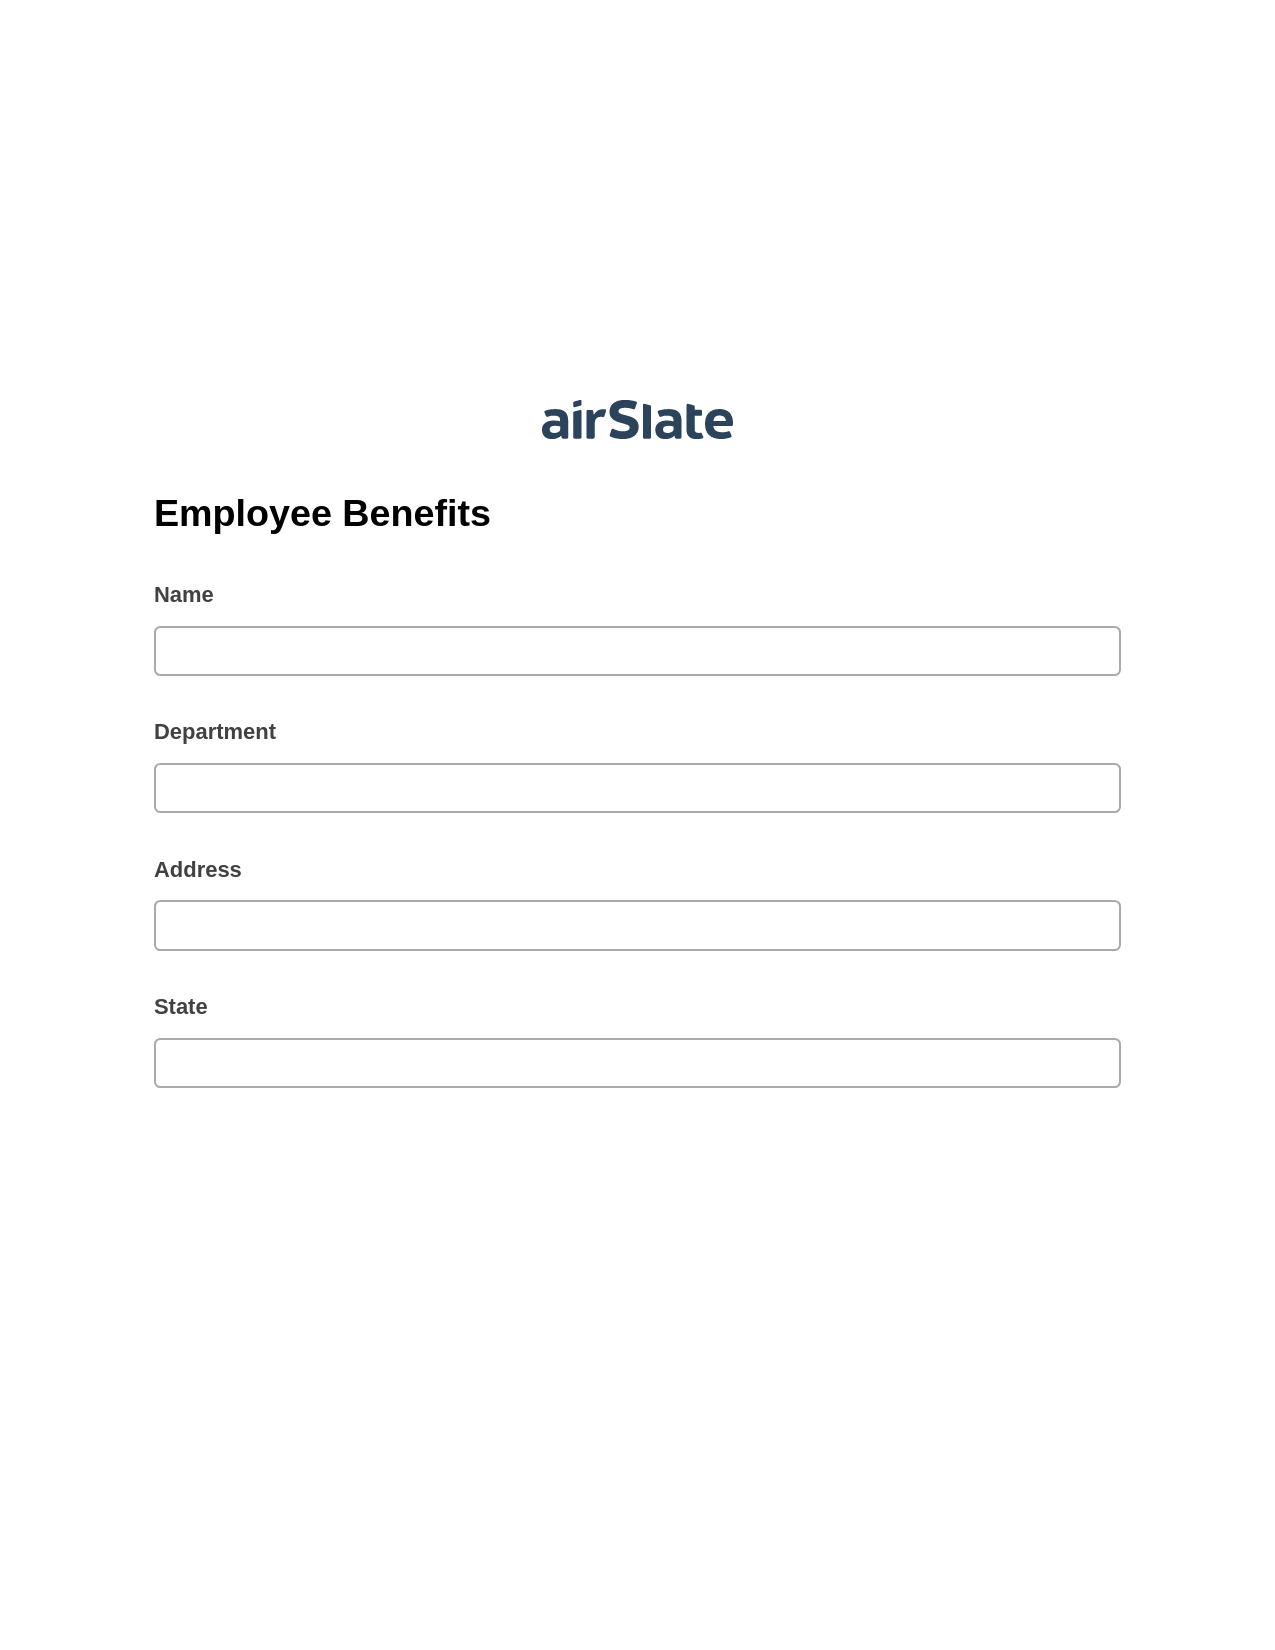 Employee Benefits Pre-fill Dropdowns from CSV File Bot, Open as Role Bot, Post-finish Document Bot